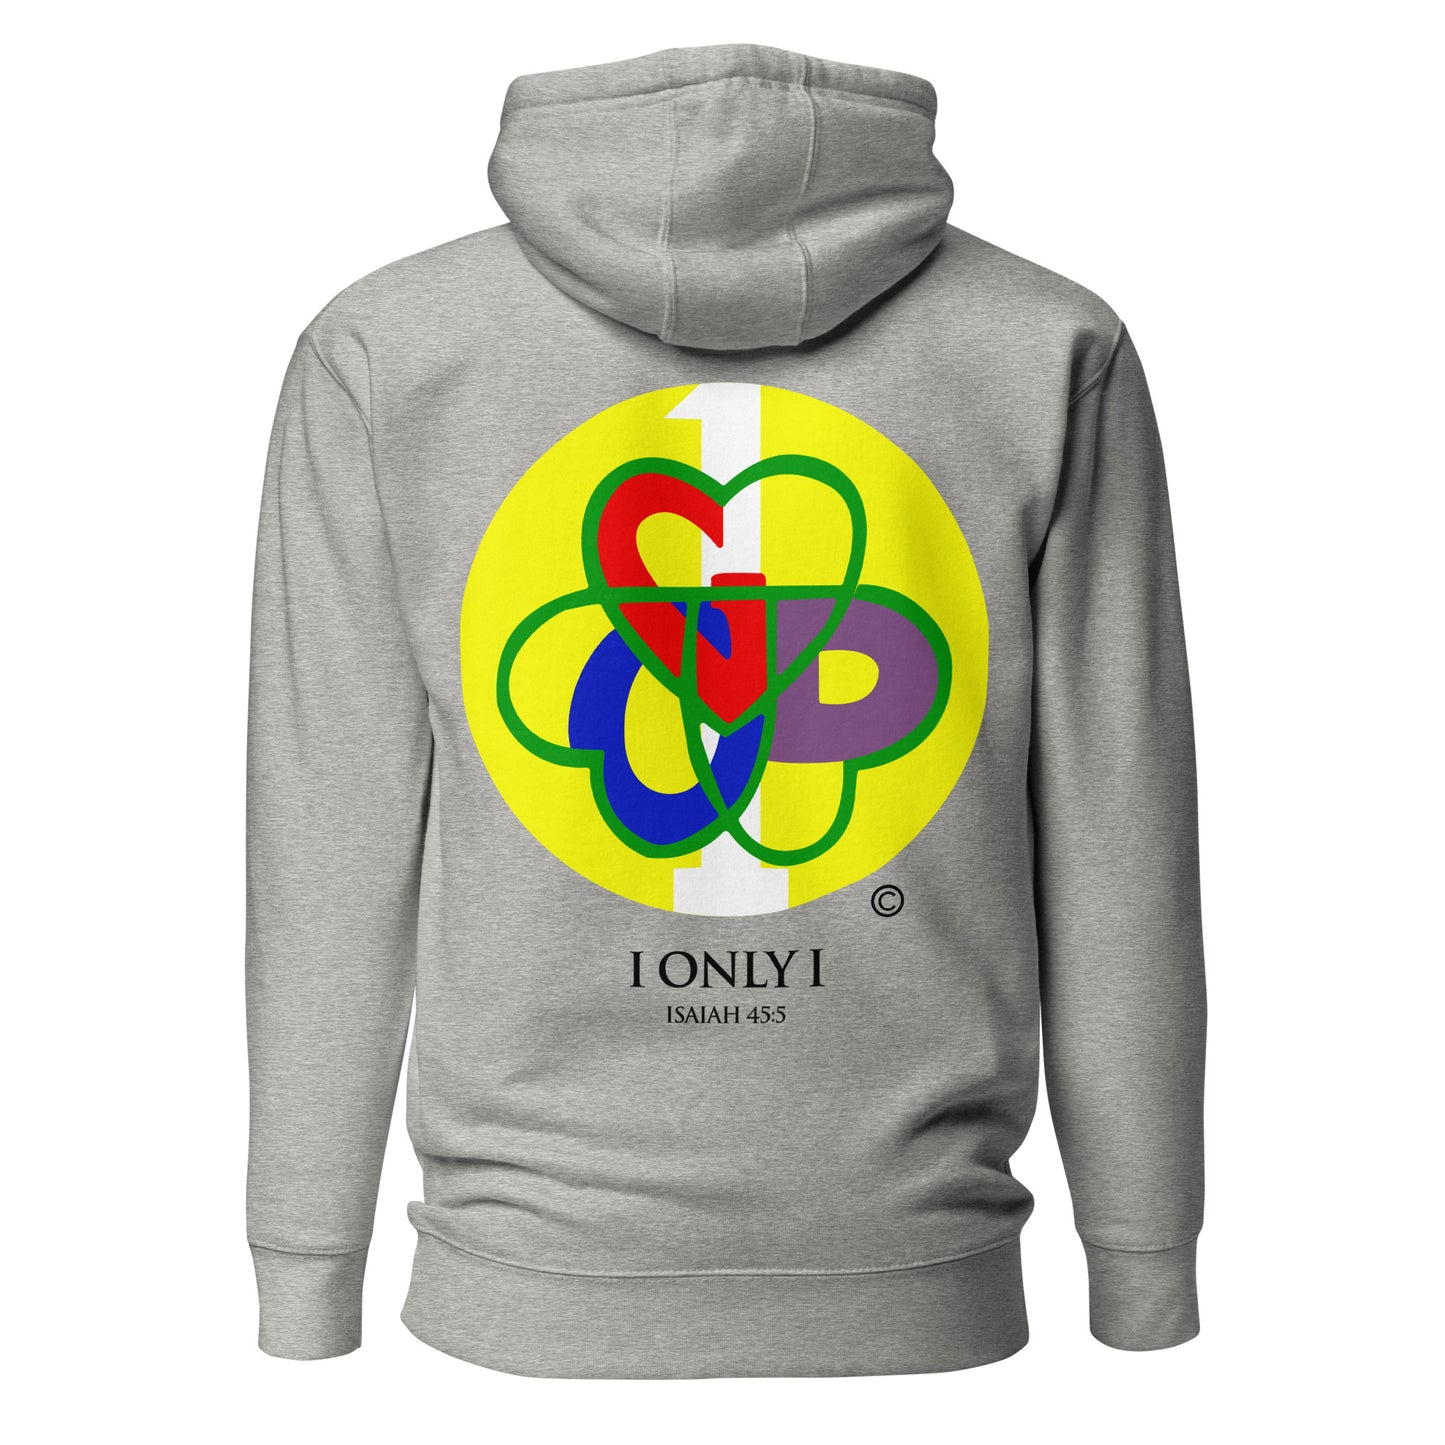 I Only I Women's Hoodie